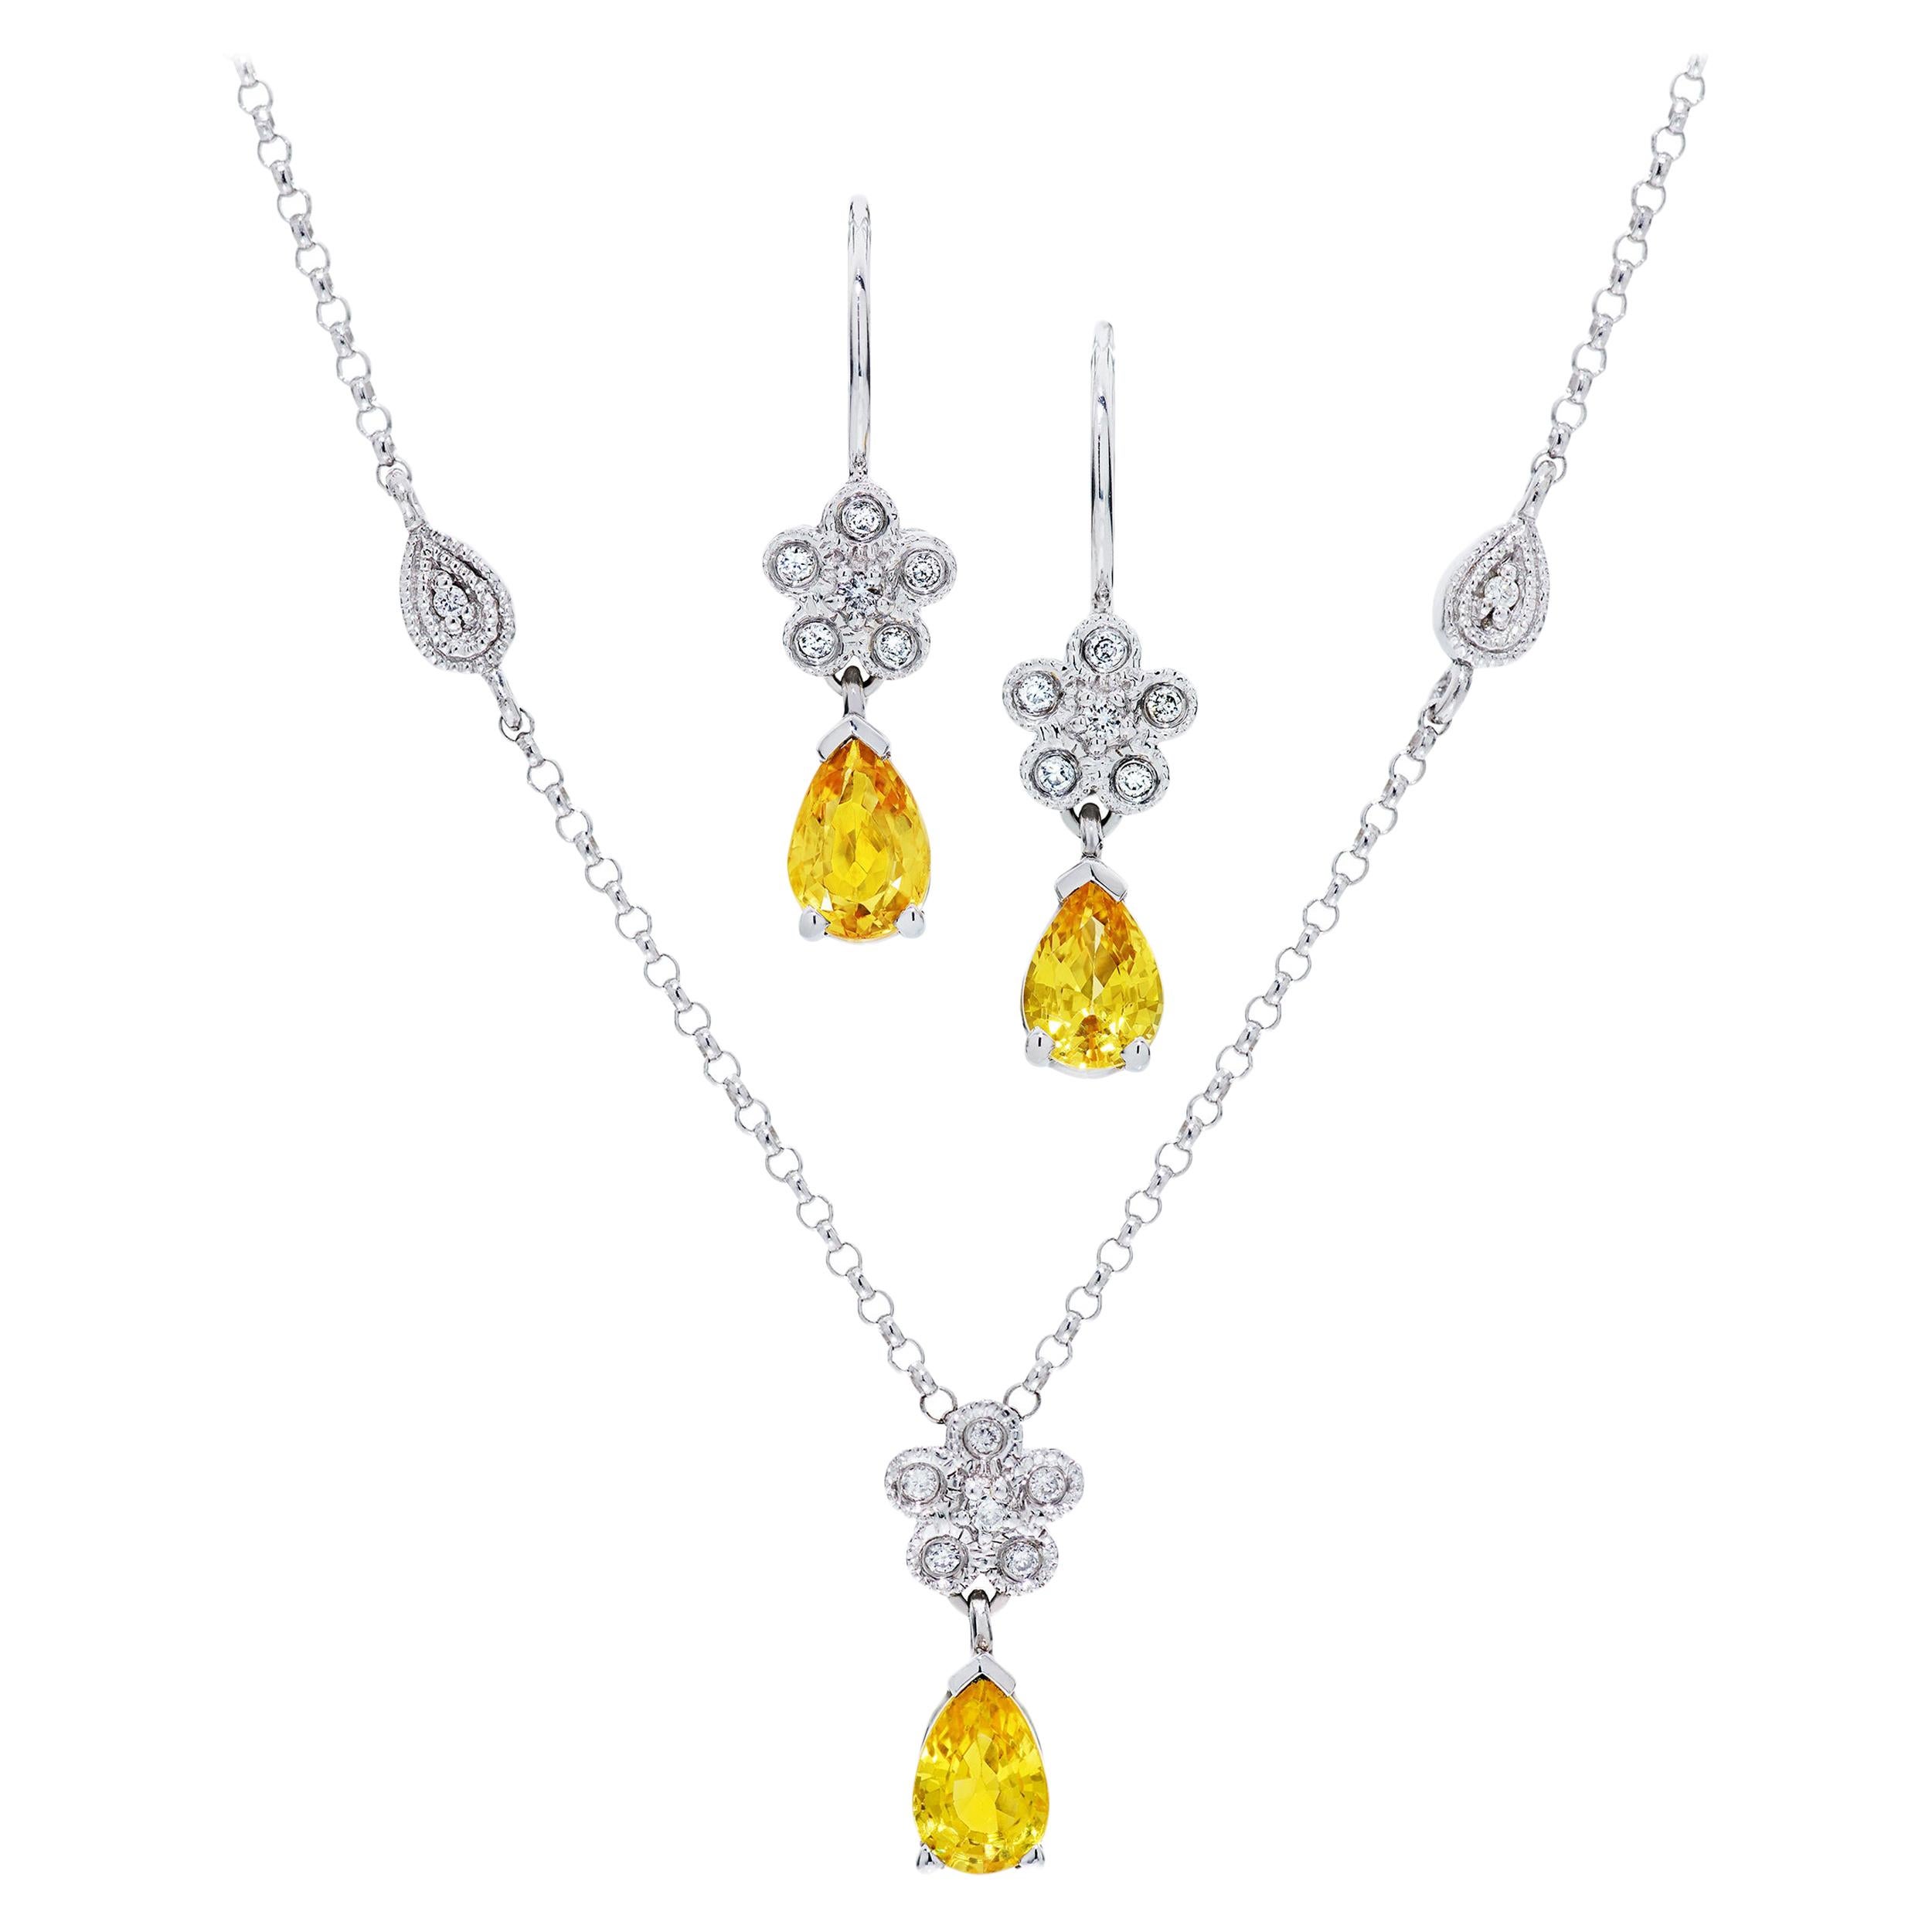 2.49 Carats Pear-Shaped Yellow Sapphire & Diamond Necklace & Earrings in 14k WG For Sale